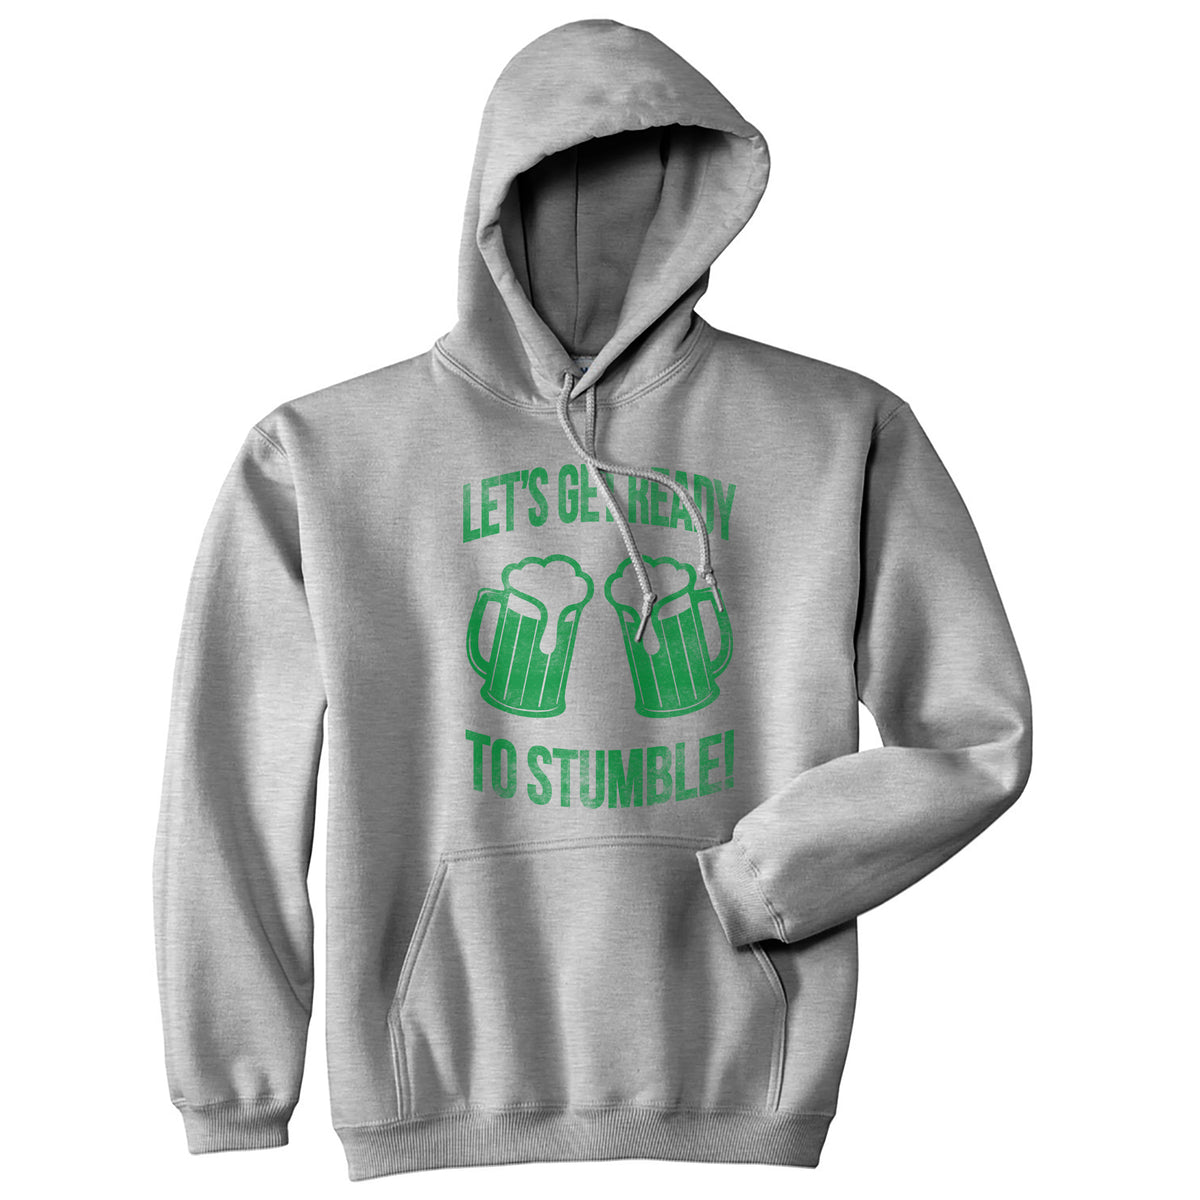 Funny Heather Grey - Ready to Stumble Lets Get Ready To Stumble Hoodie Nerdy Saint Patrick&#39;s Day Drinking Tee